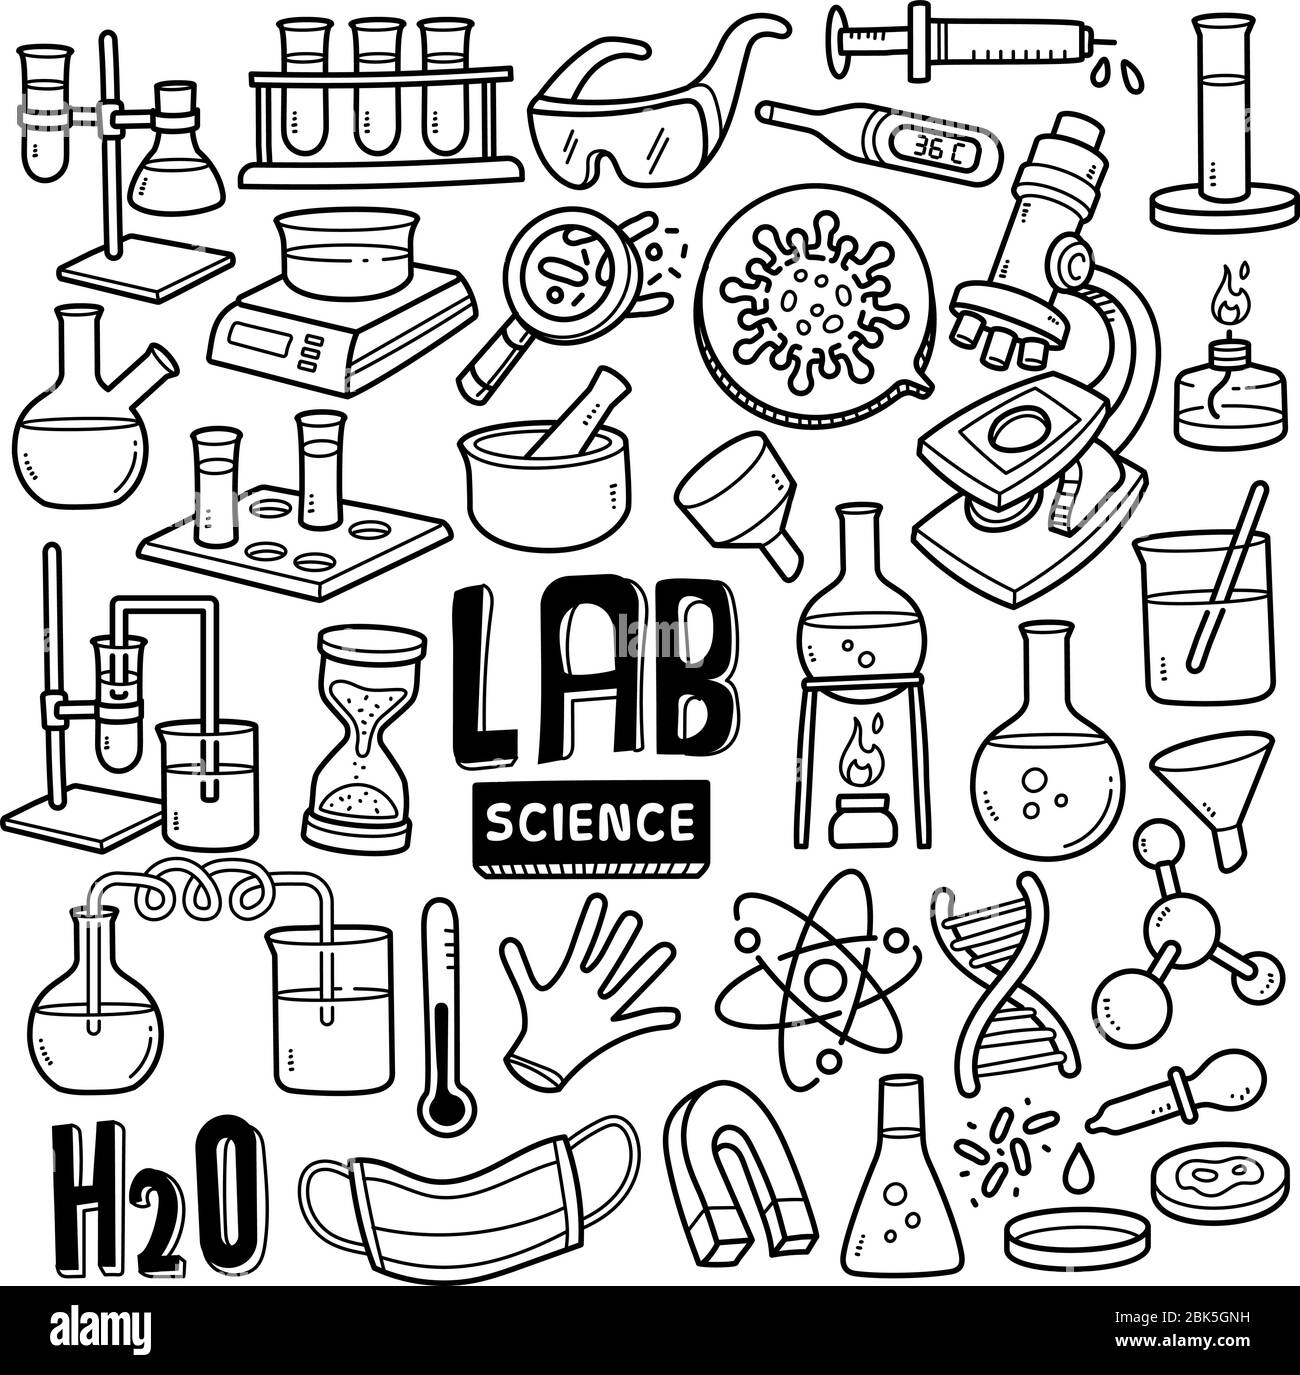 Clinical laboratory sciences doodle drawing collection. Elements such as lab equipments, experiments etc are included. Hand drawn vector doodle illust Stock Vector